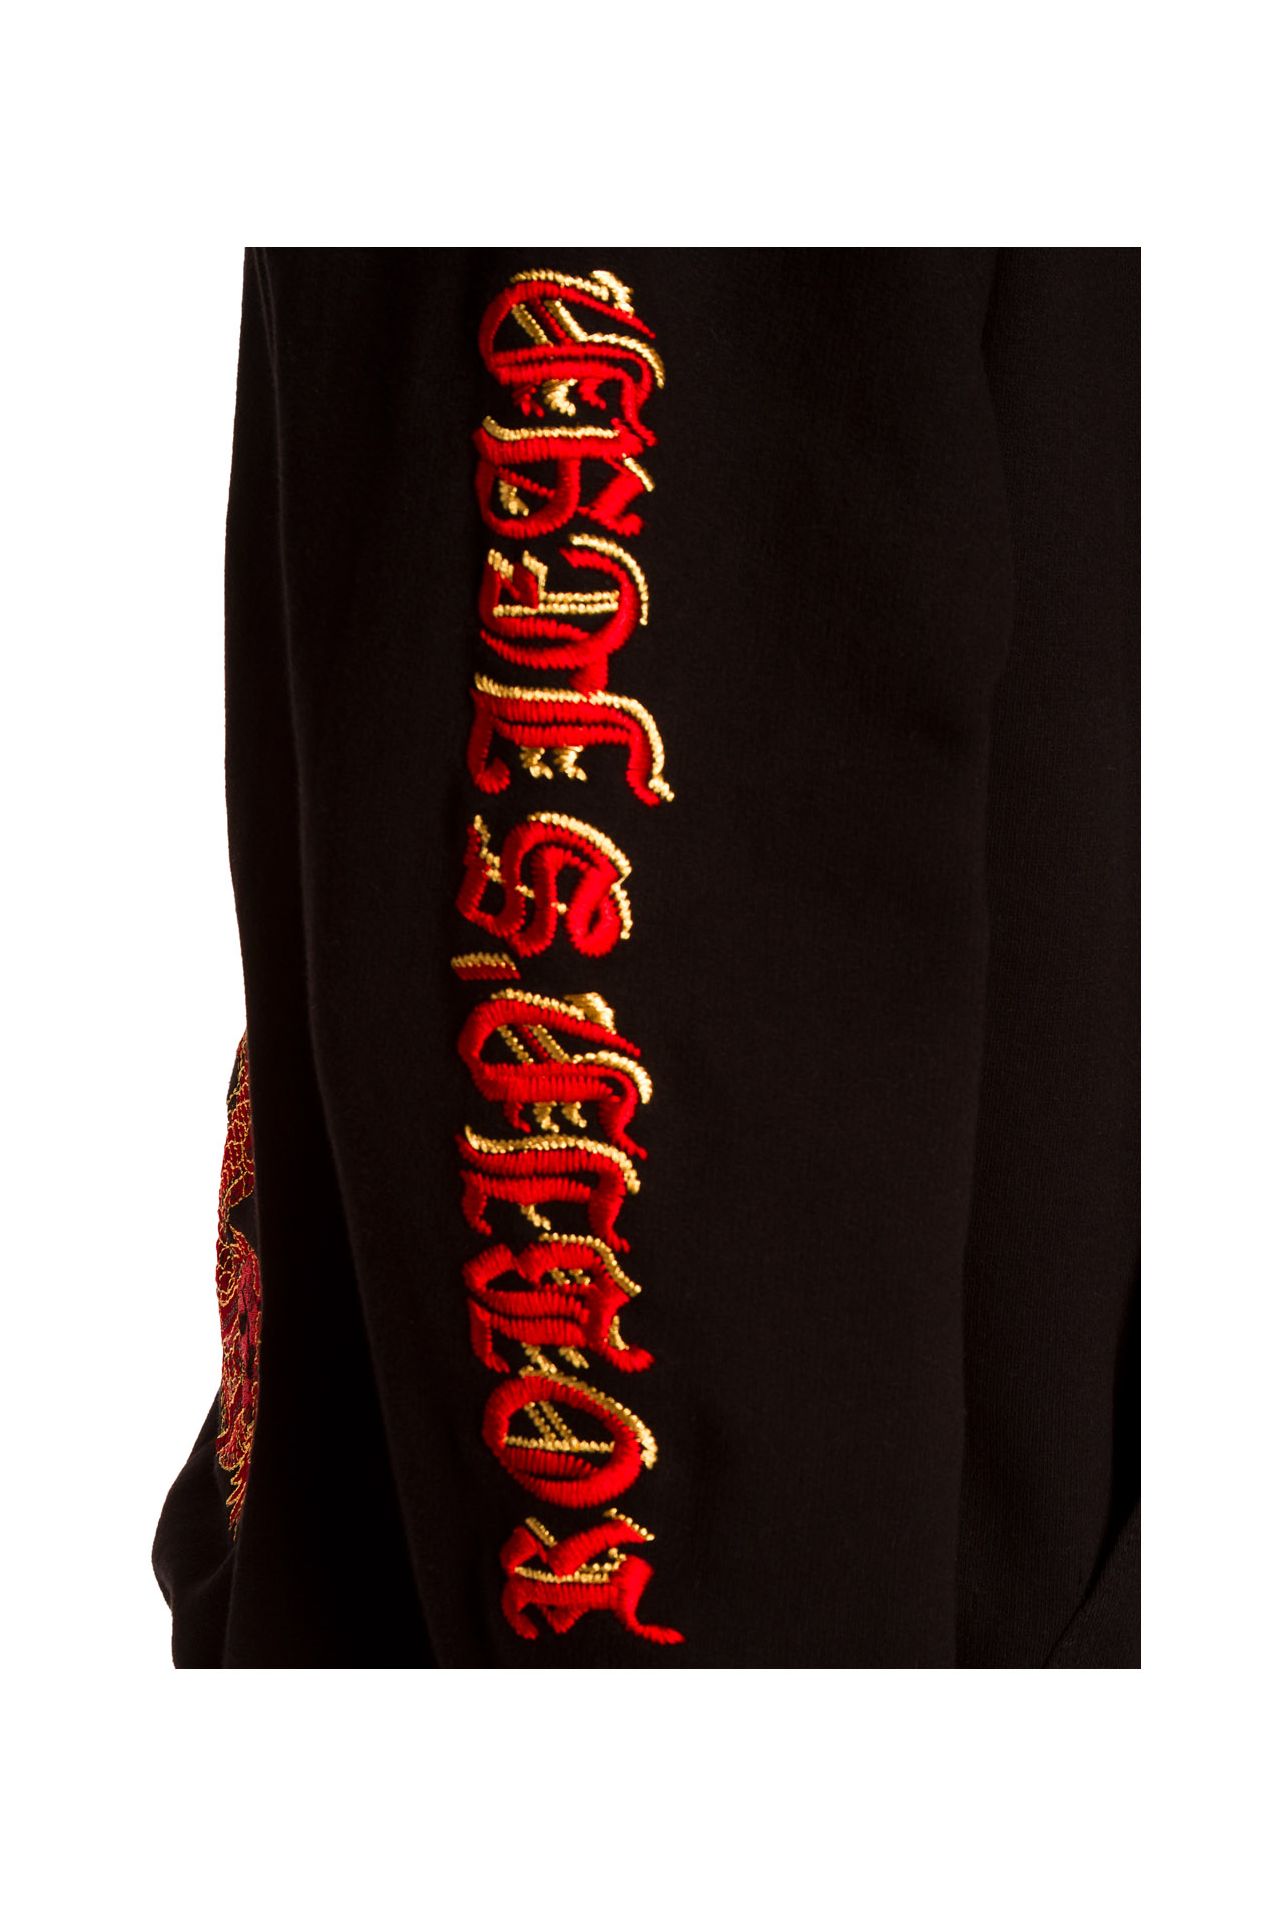 LUCKY DRAGON HOODIE W/ GOLD AND RED IN BLACK